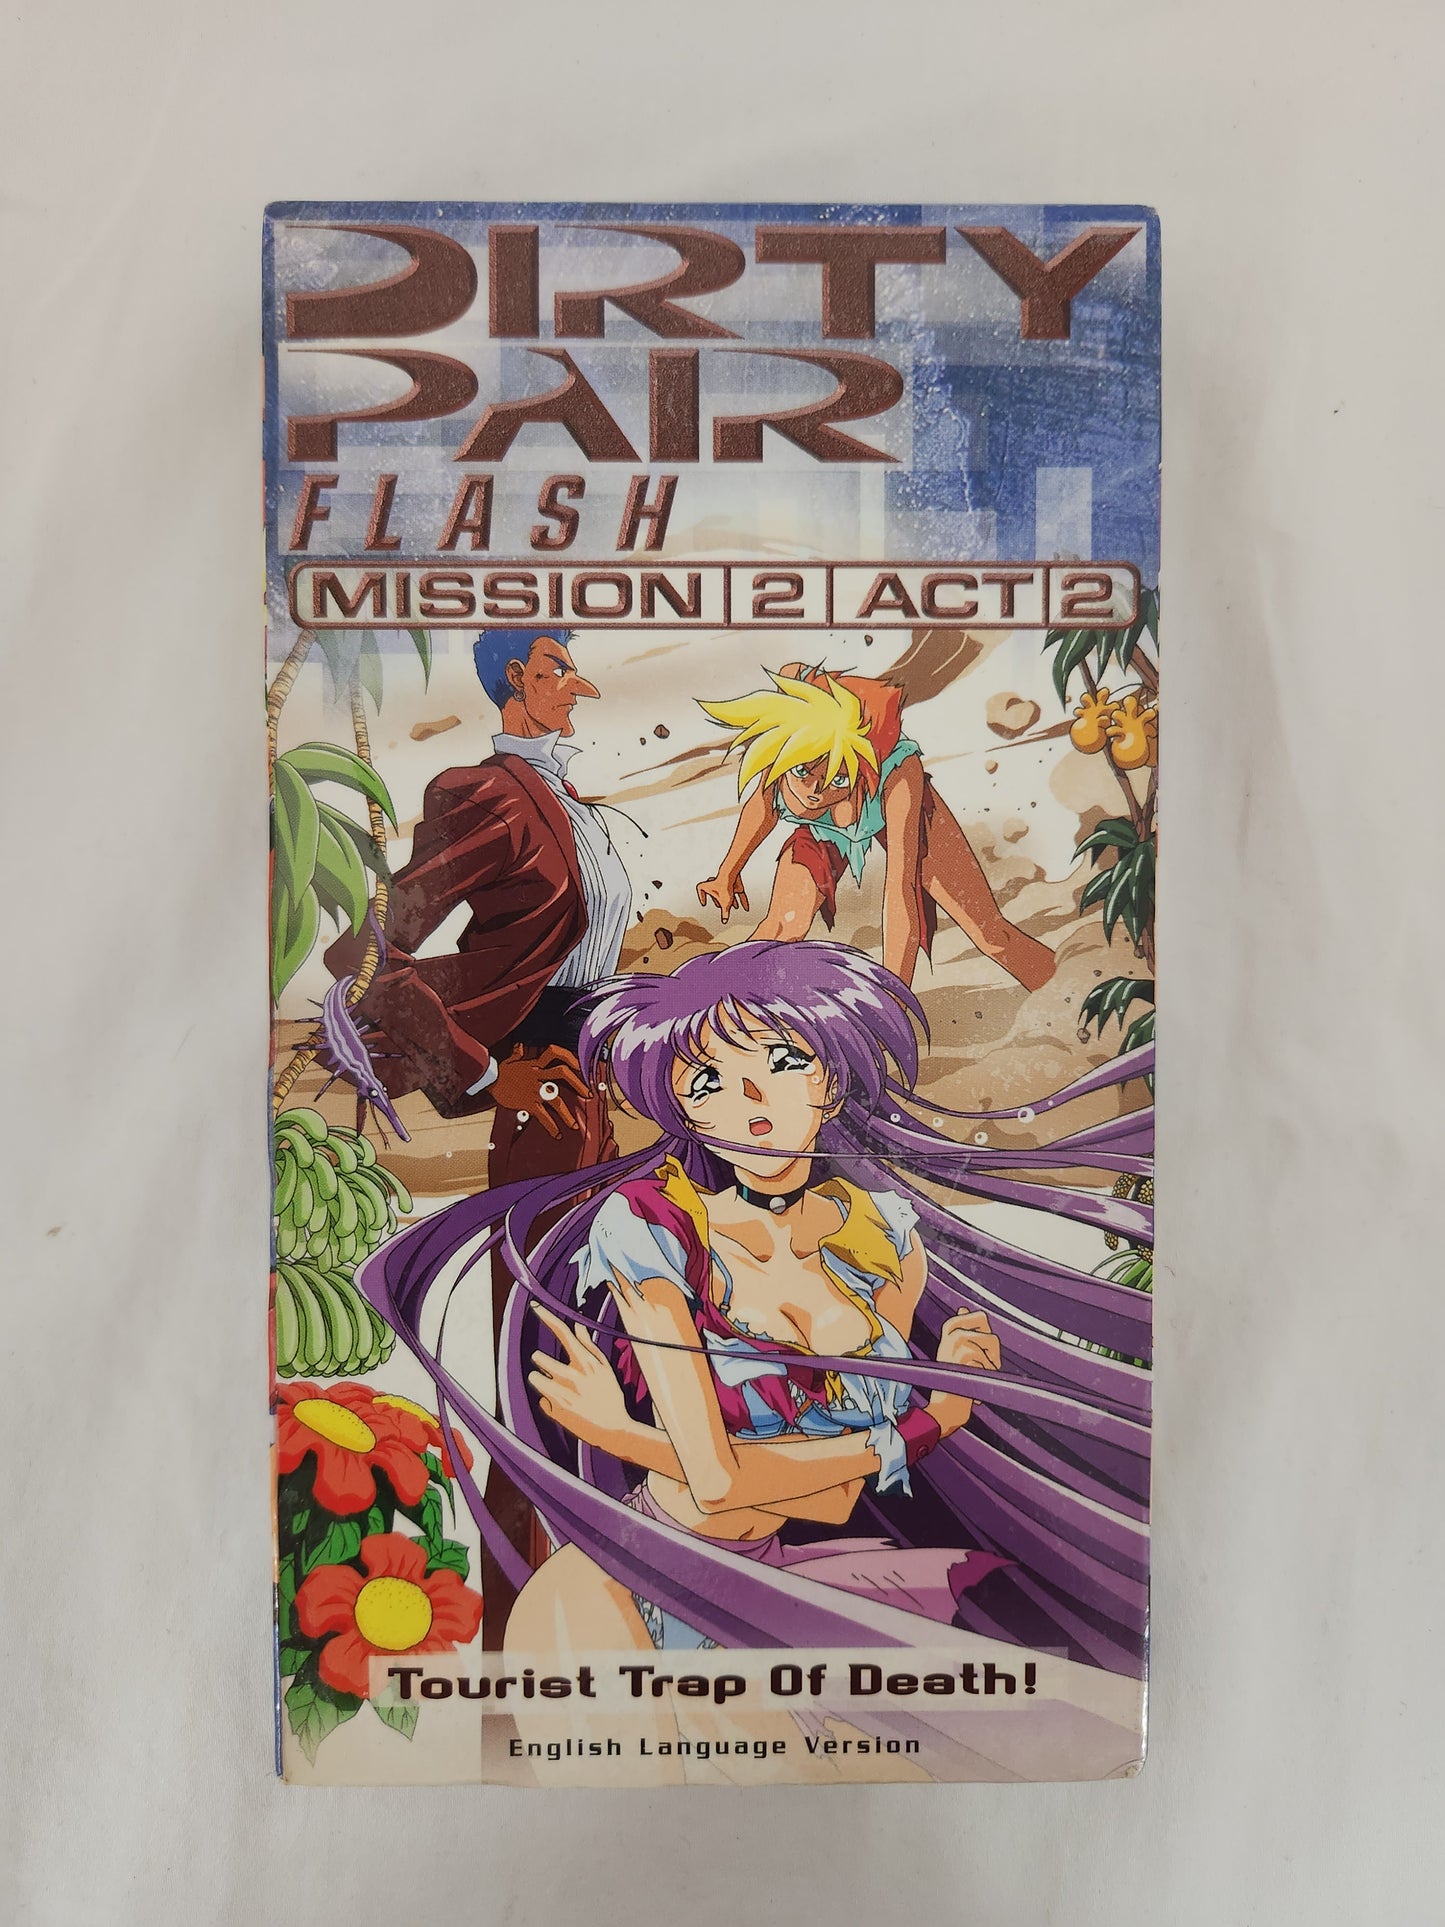 1990's Anime (English Dubbed) VHS Tapes - Set of 3 Factory Sealed